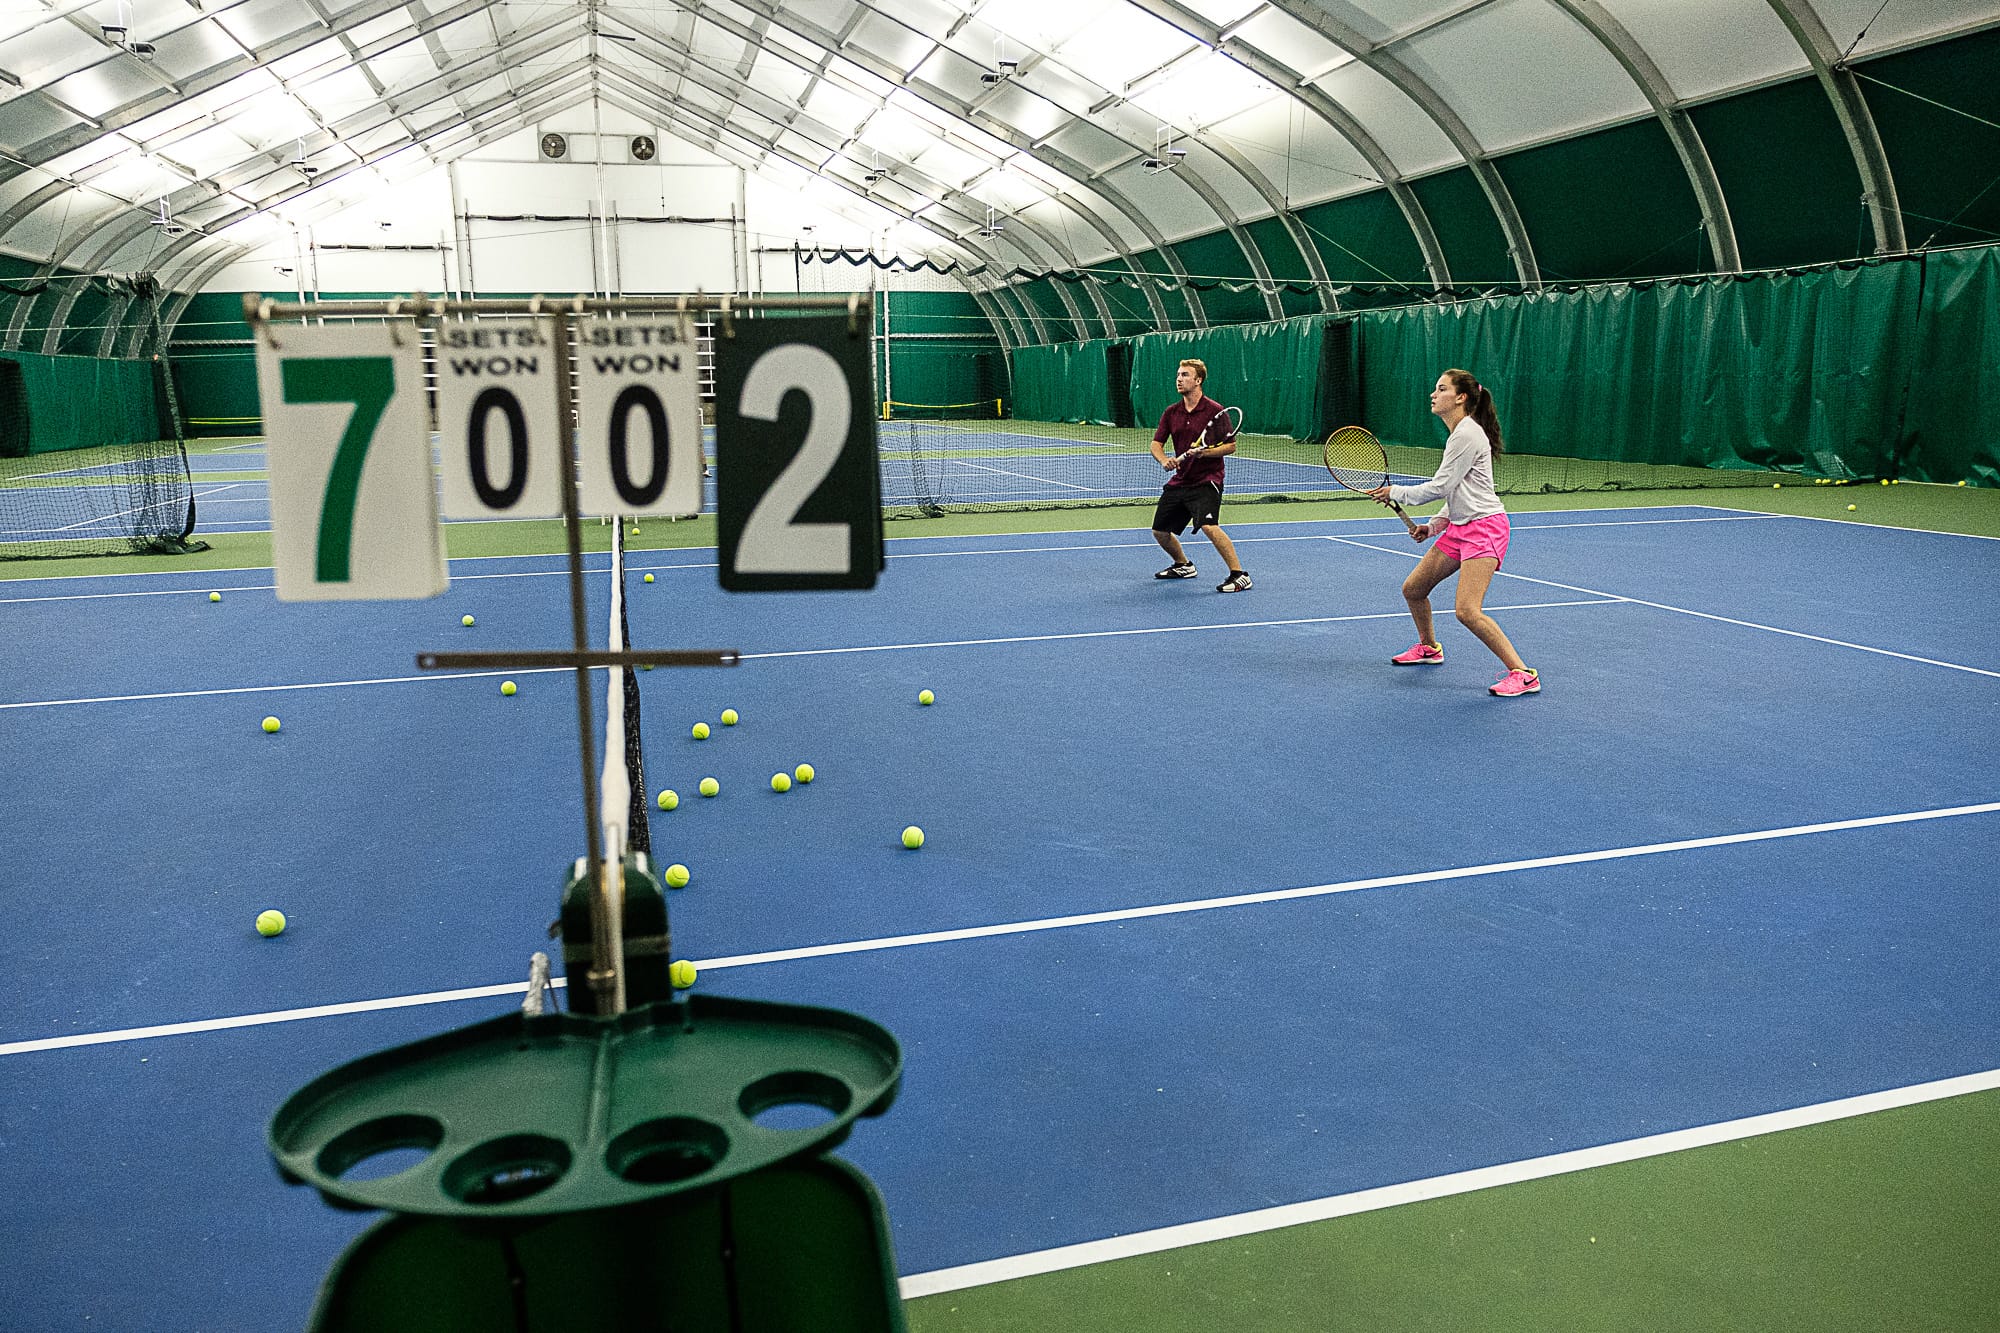 Behoefte aan magnetron Chemicus Evergreen Tennis, Club Green Meadows set to reopen courts - The Columbian